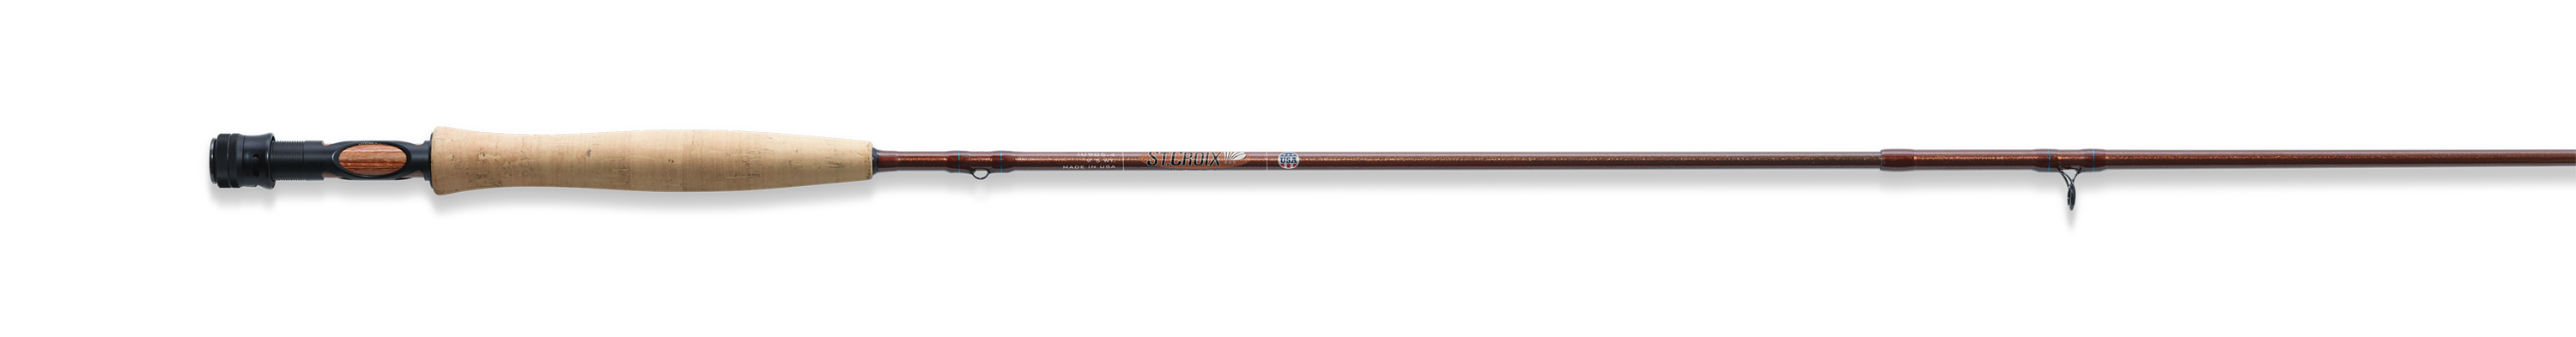 St. Croix Imperial USA Fly Switch Rod